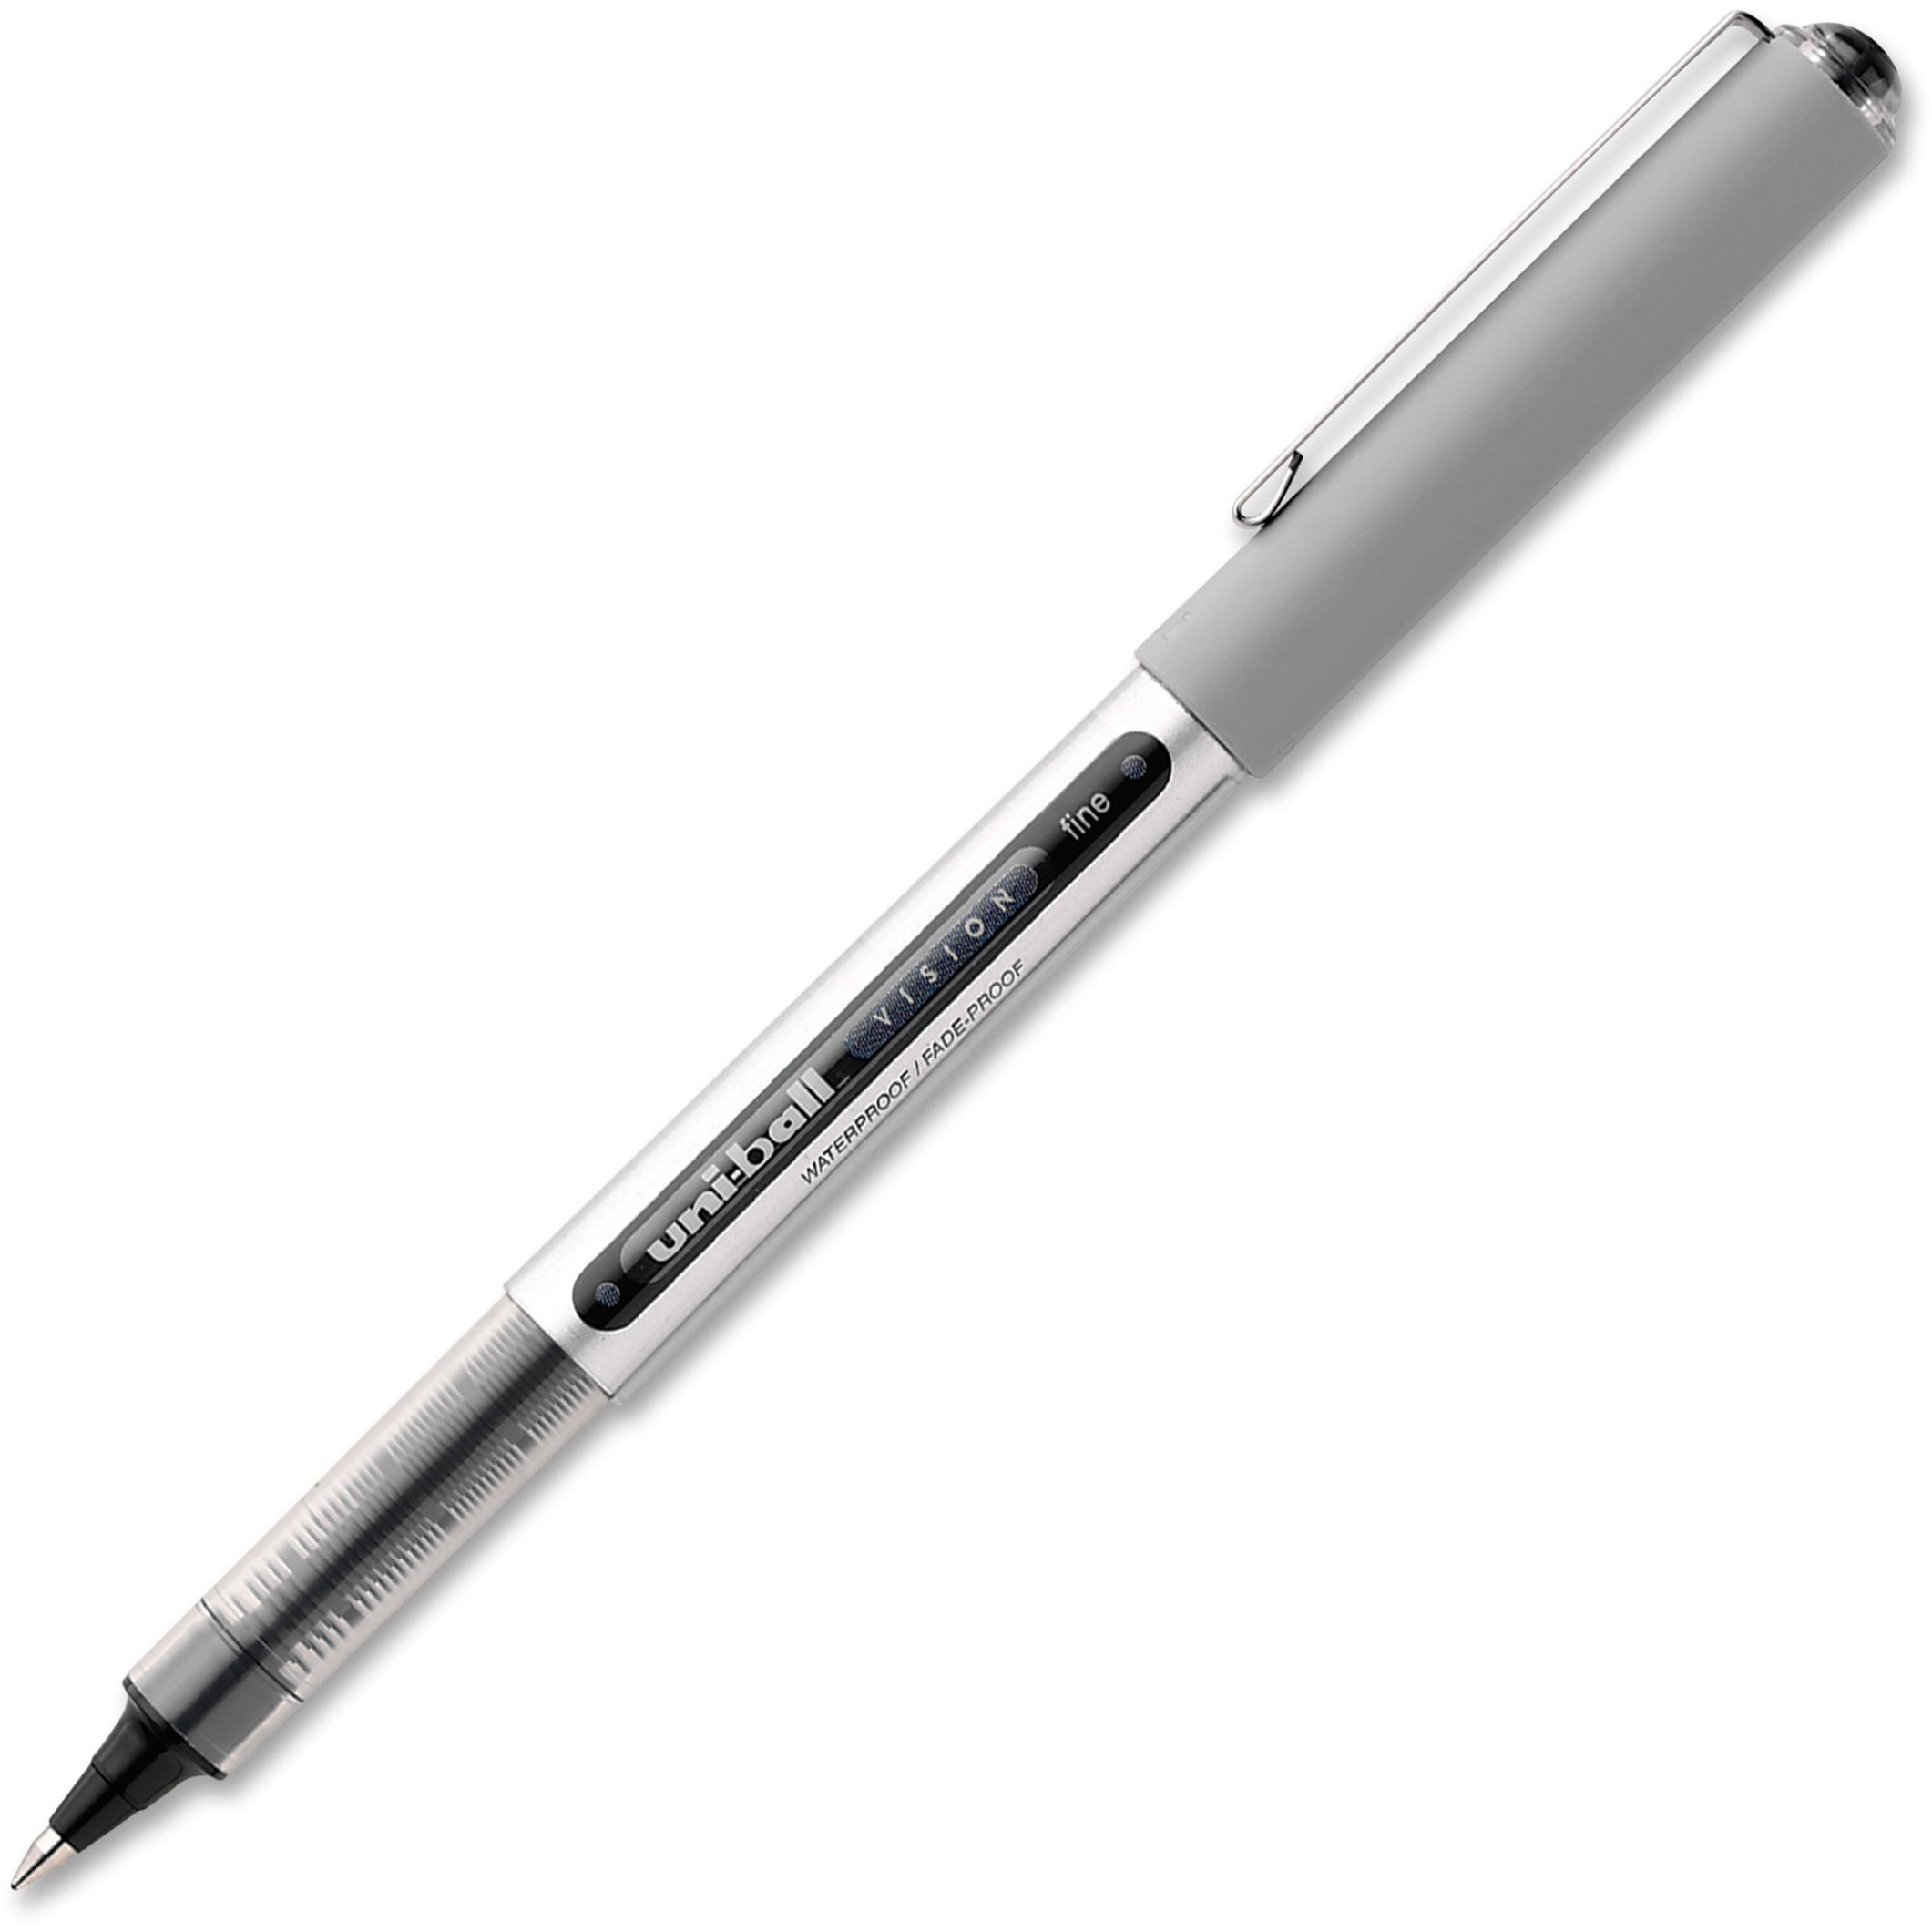 Blue or 3 Colour. Available in Black Uniball eye 0.7mm Fine Pen 5 Pack 